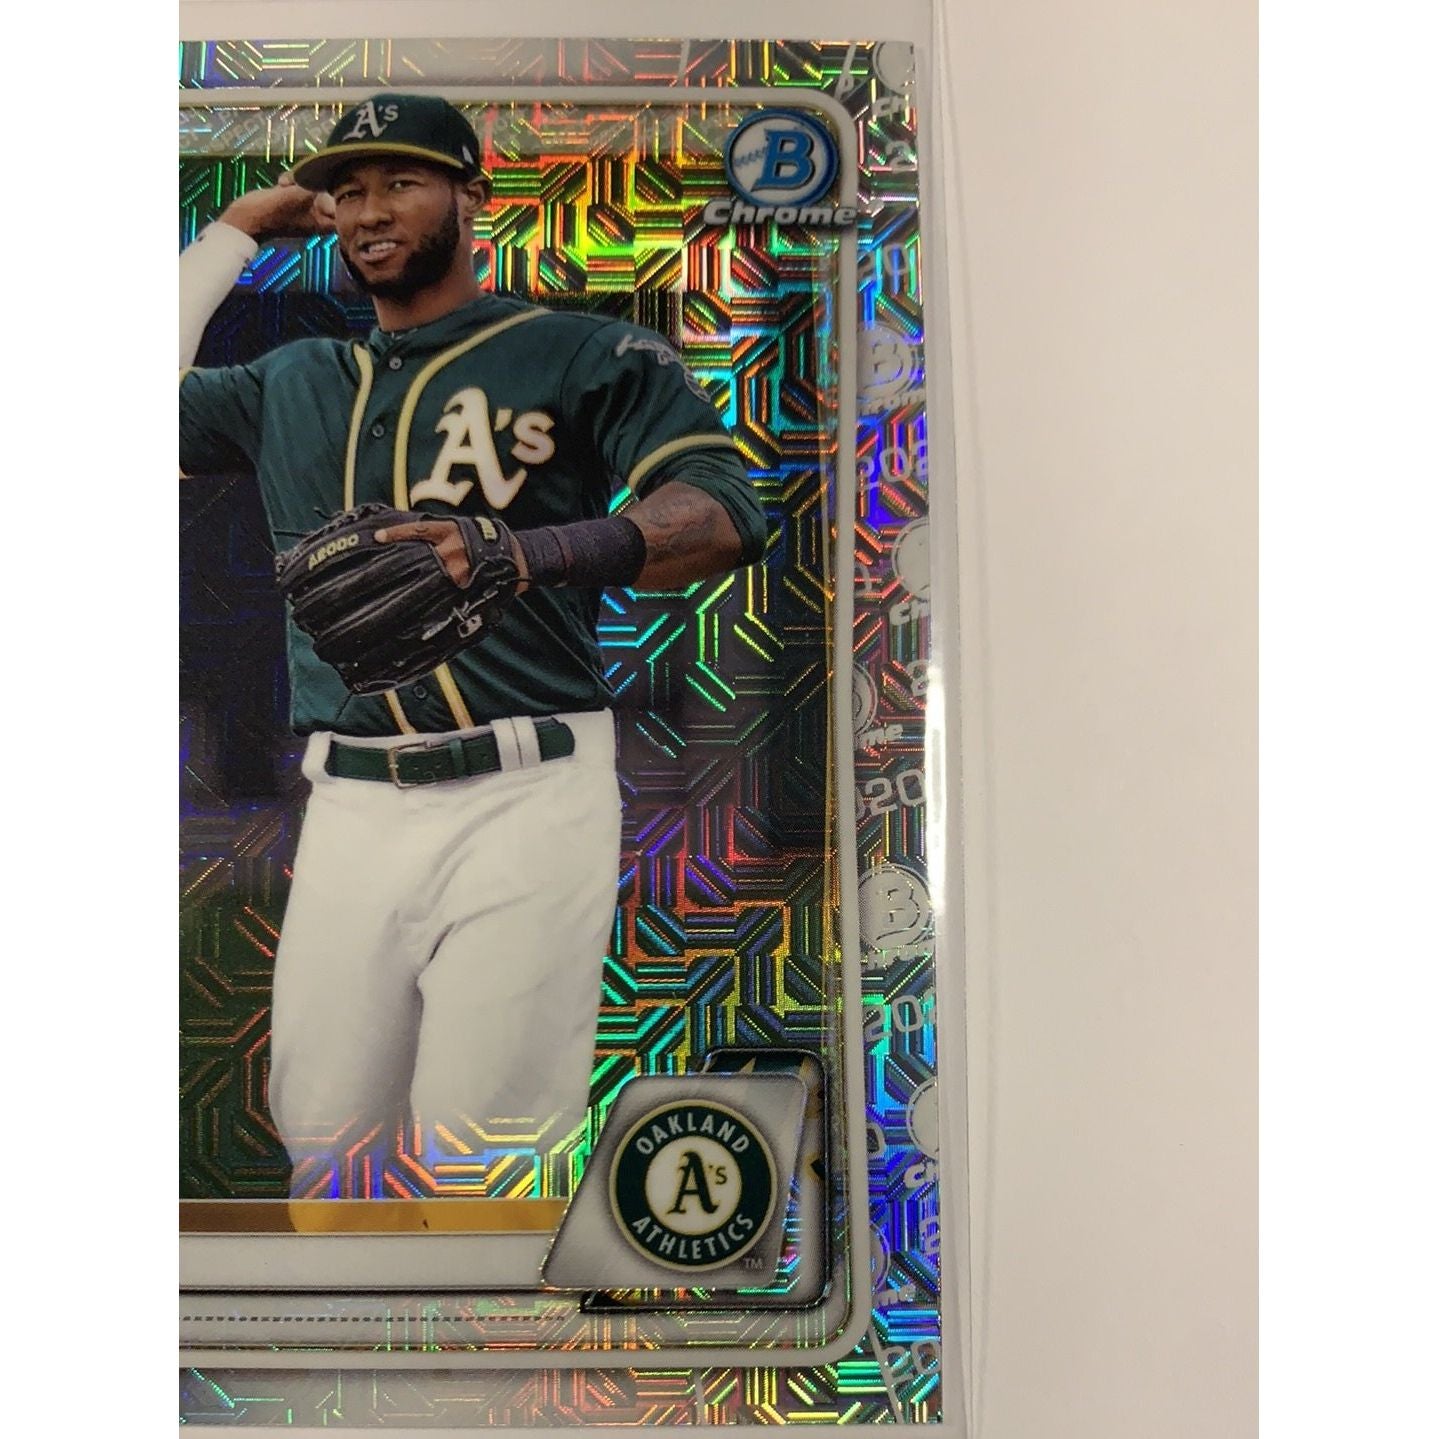  2020 Bowman Chrome Jorge Mateo Mojo Refractor  Local Legends Cards & Collectibles